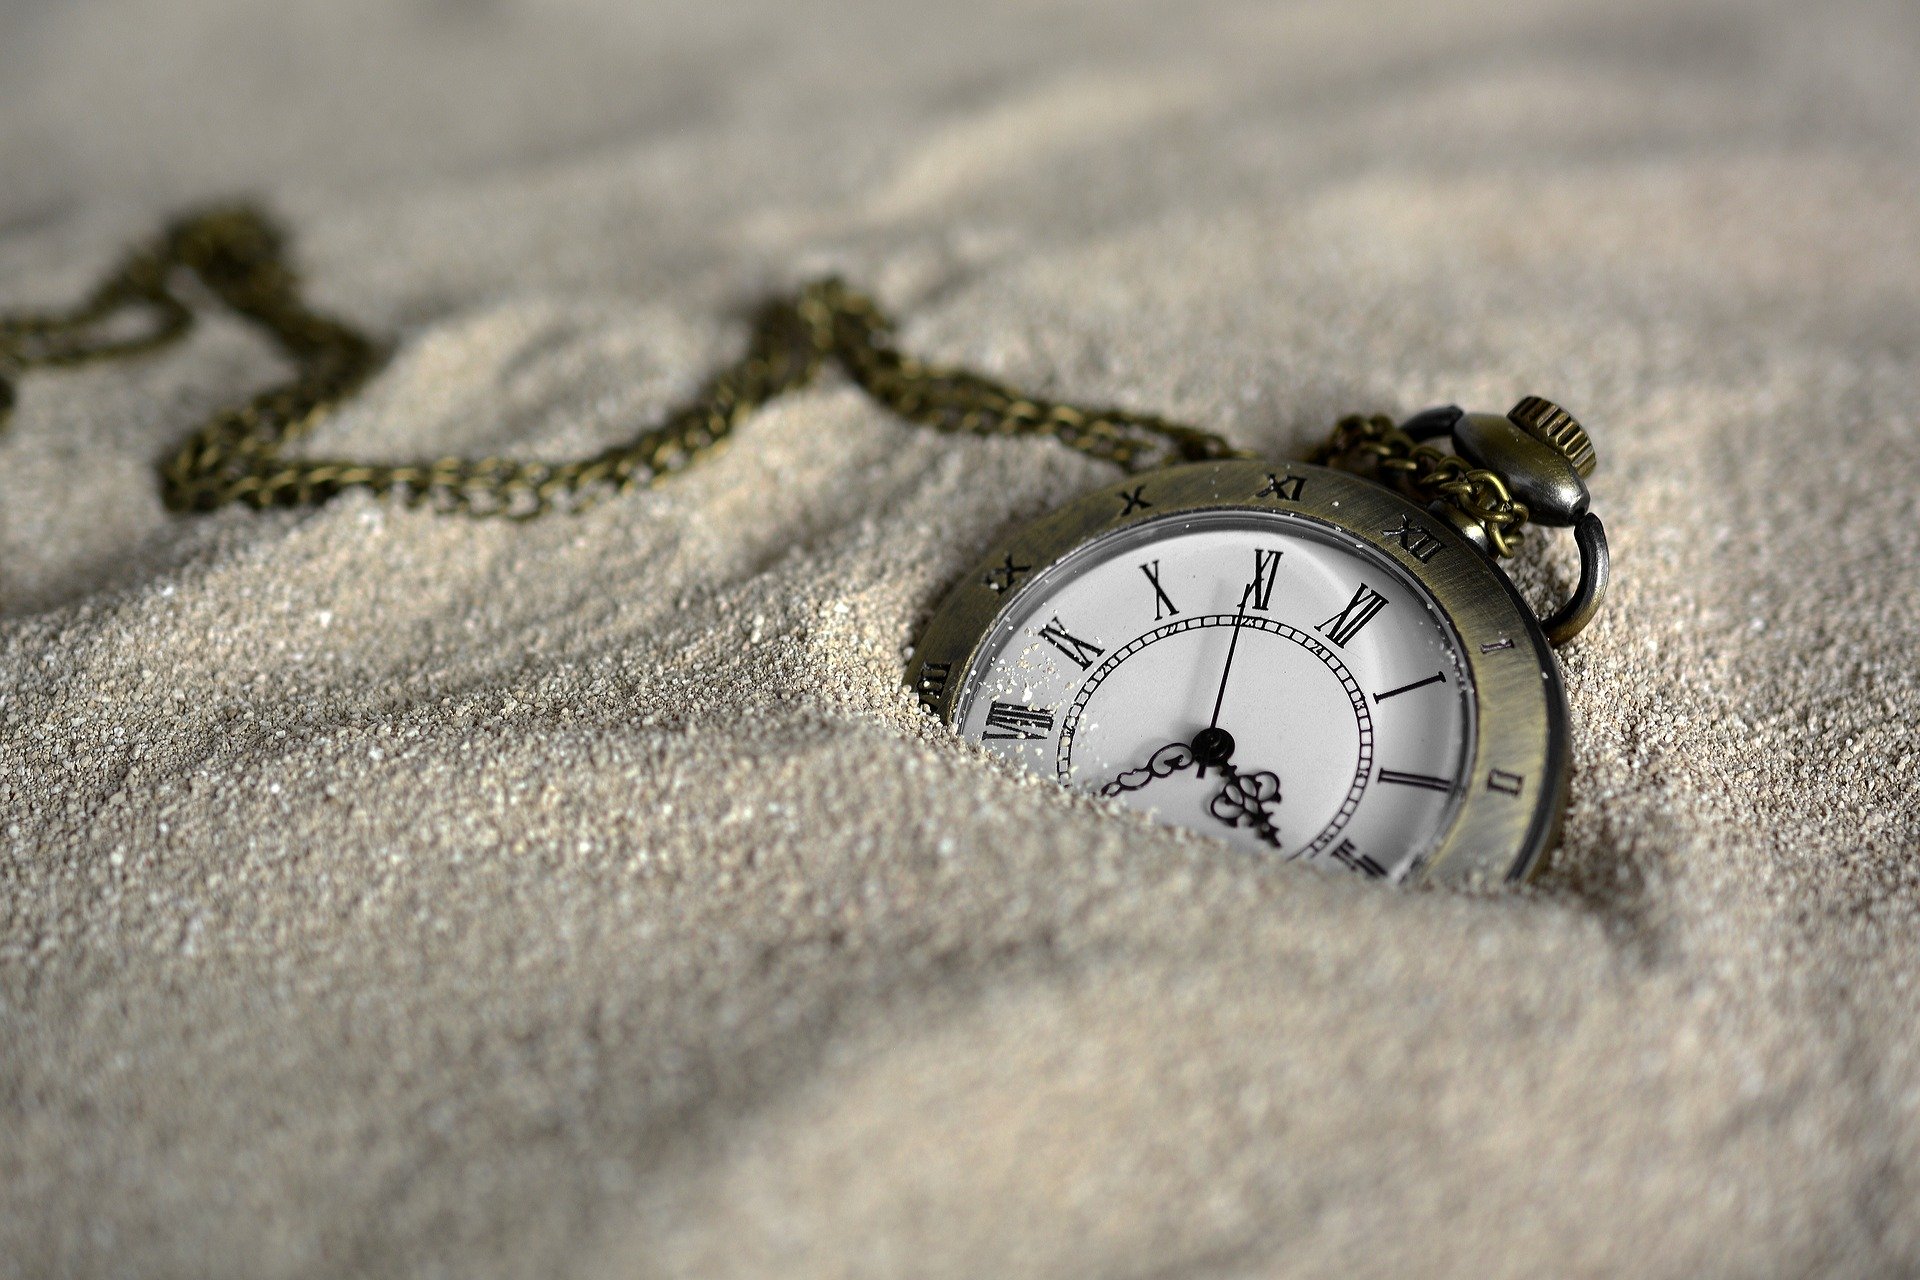 pocket-watch-3156771_1920-image-by-annca-from-pixabay